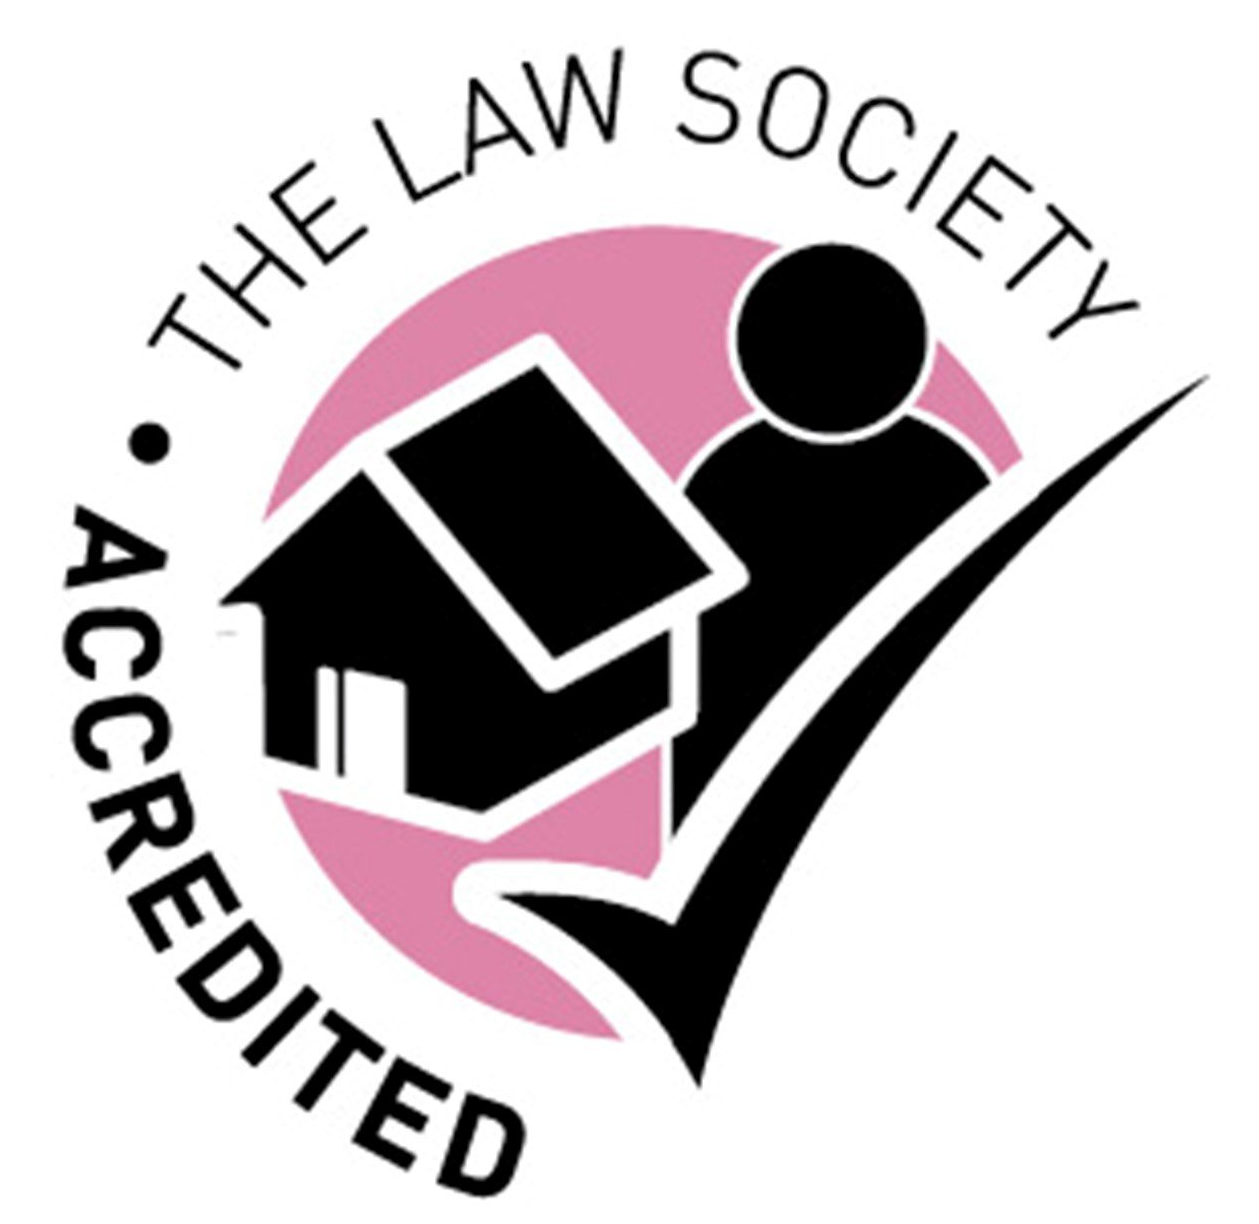 The Law Society Conveyancing